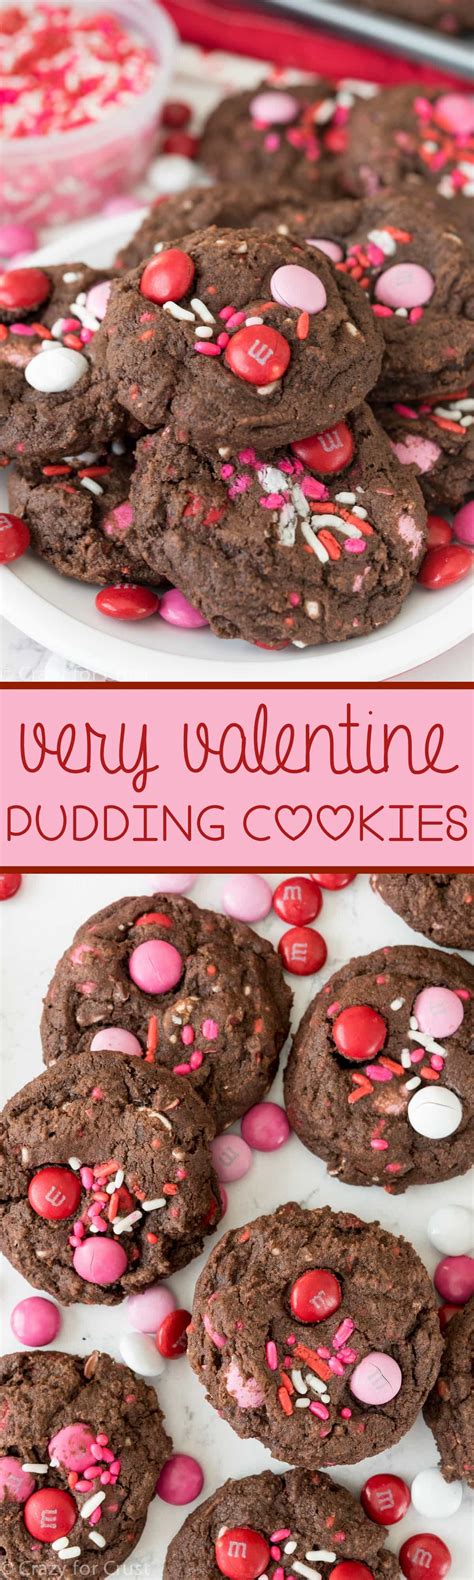 chocolate-valentine-cookies-crazy-for-crust image